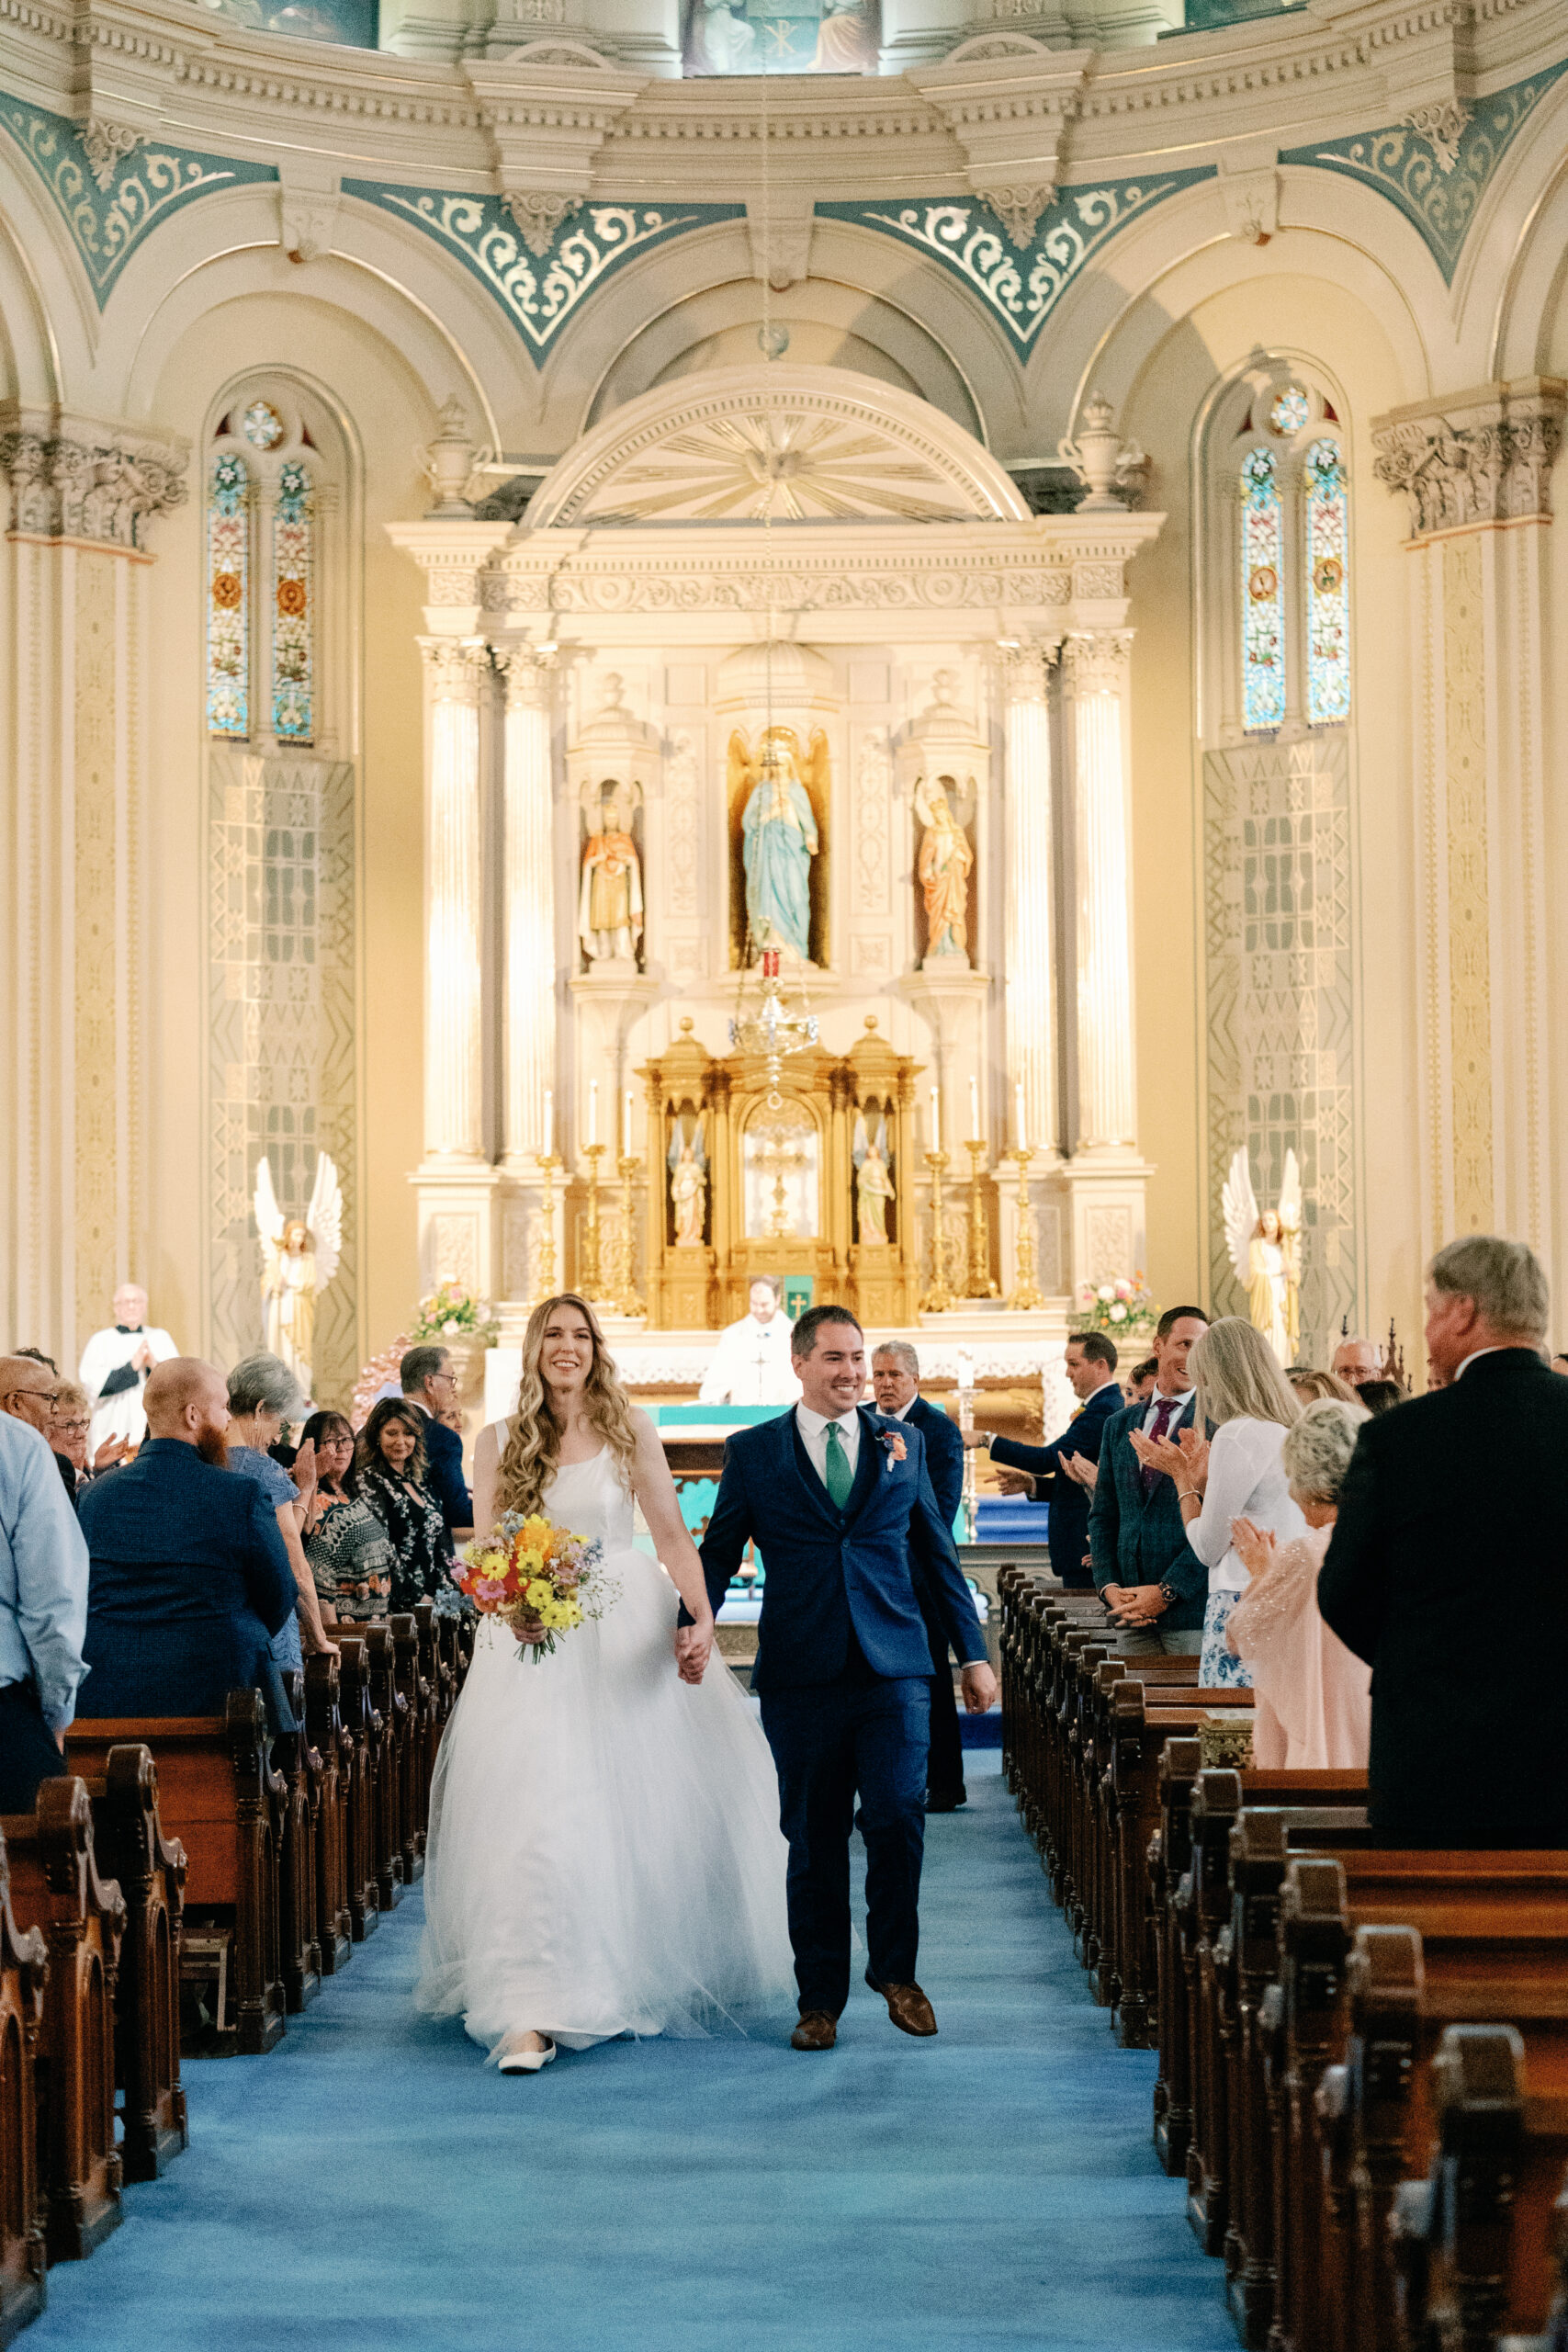 Couture Bride Ashley in Custom Sarah Kolis Gown and veil and groom in cathedral